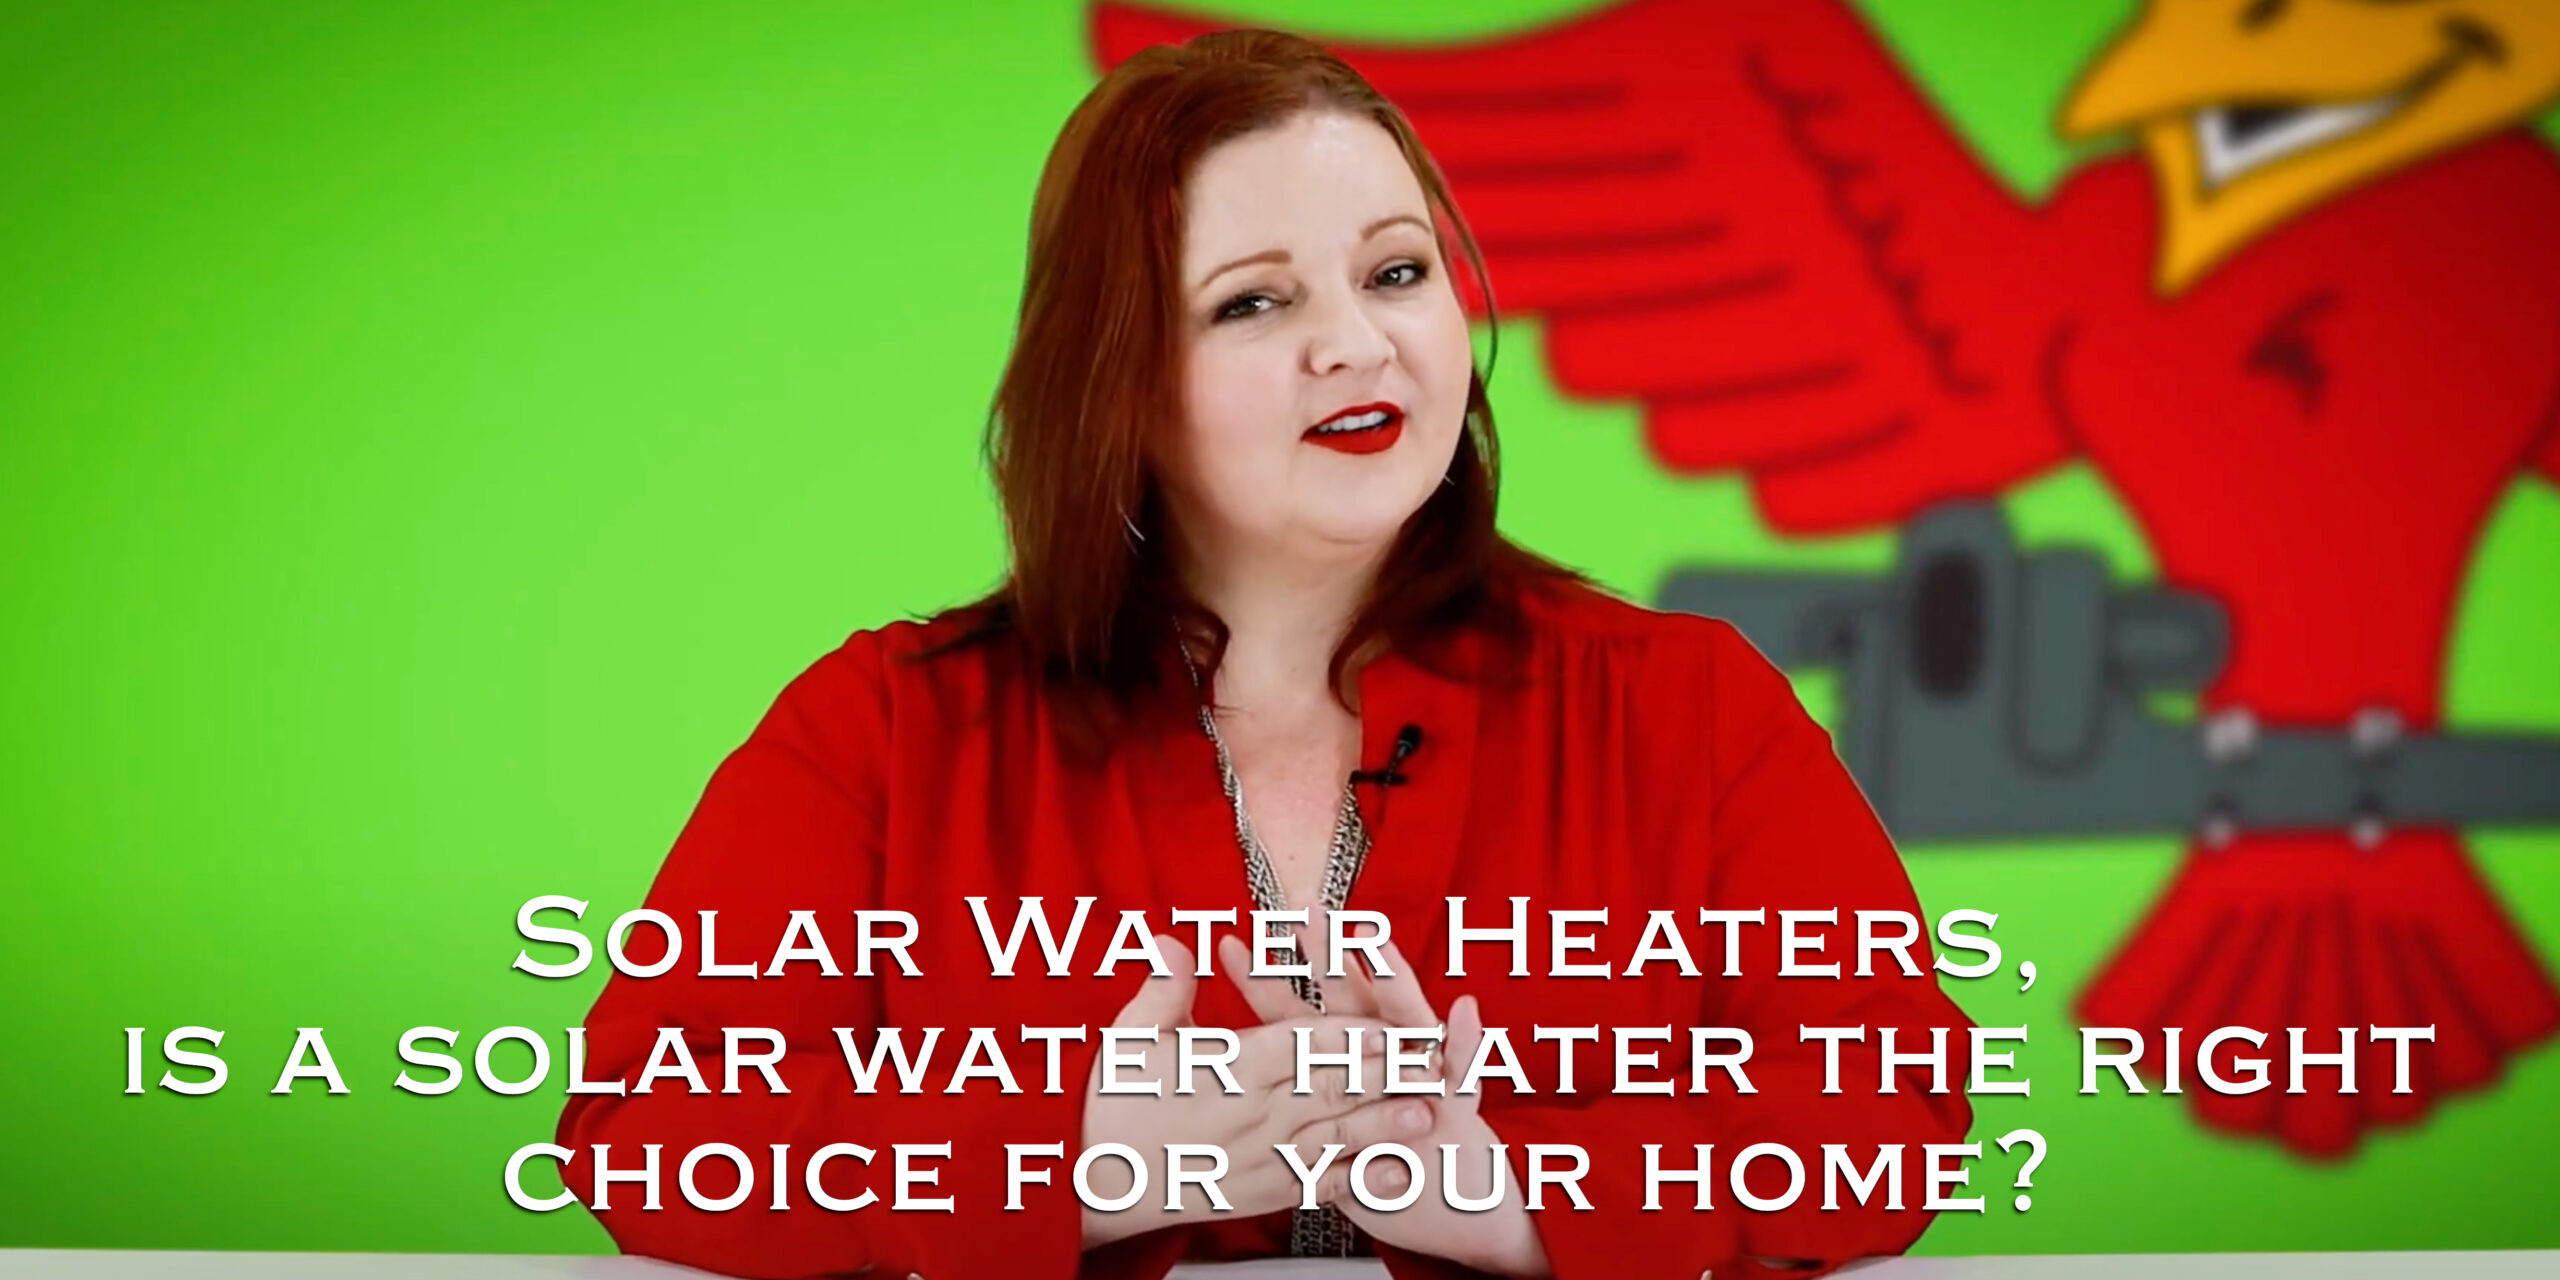 Solar-Water-Heaters-is-a-solar-water-heater-the-right-choice-for-your-home